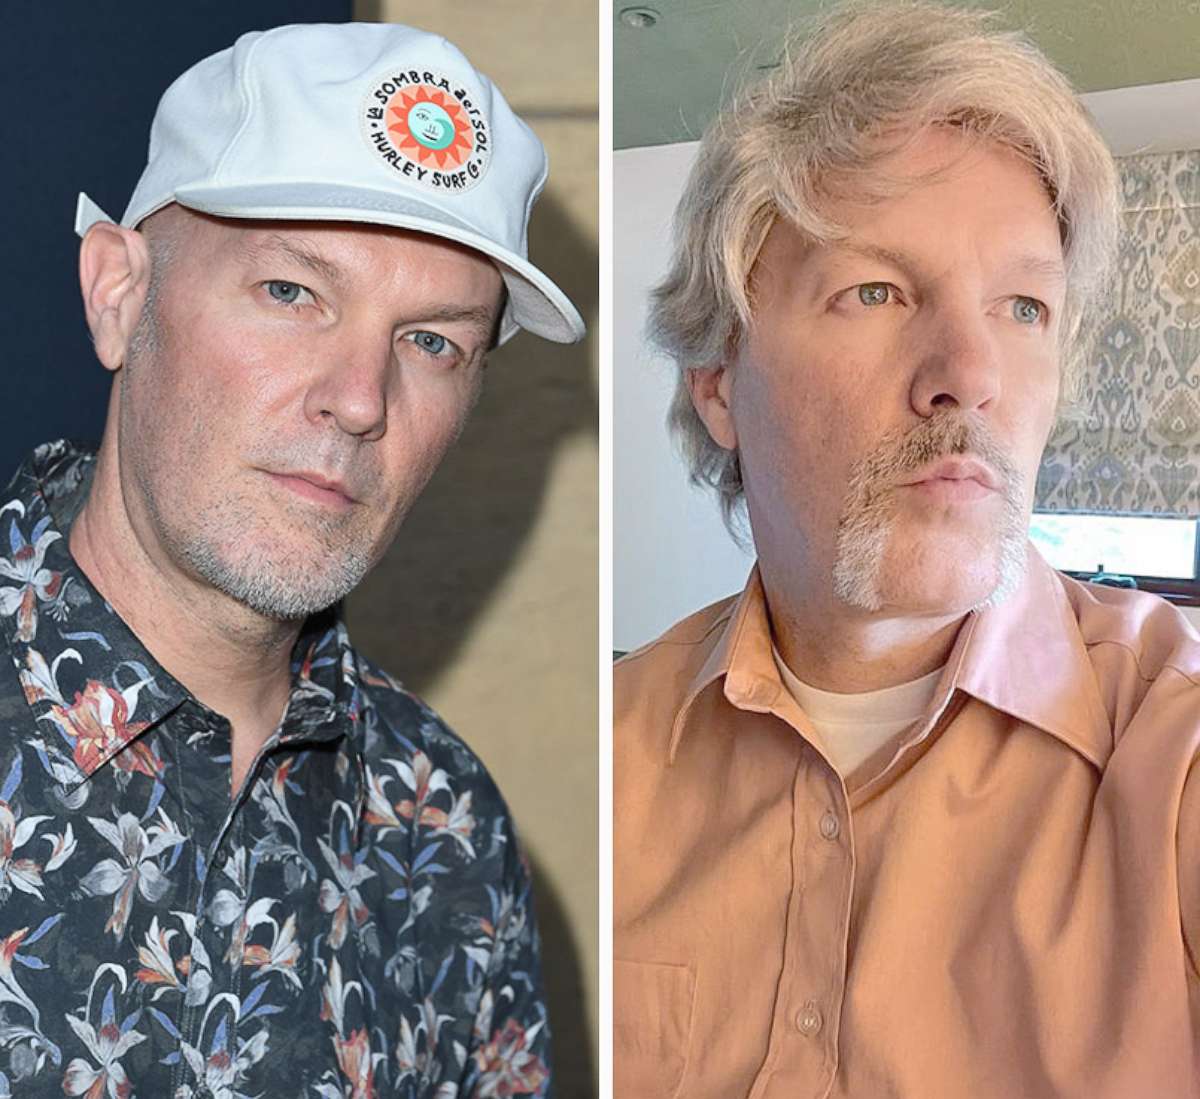 PHOTO: Fred Durst has stunned fans with a brand new look. Left, Fred Durst arrives at the premiere of "The Fanatic" on Aug. 22, 2019 in Hollywood, Calif.; Right, Fred Durst is pictured in an image he posted to his Instagram account on July 28, 2021.